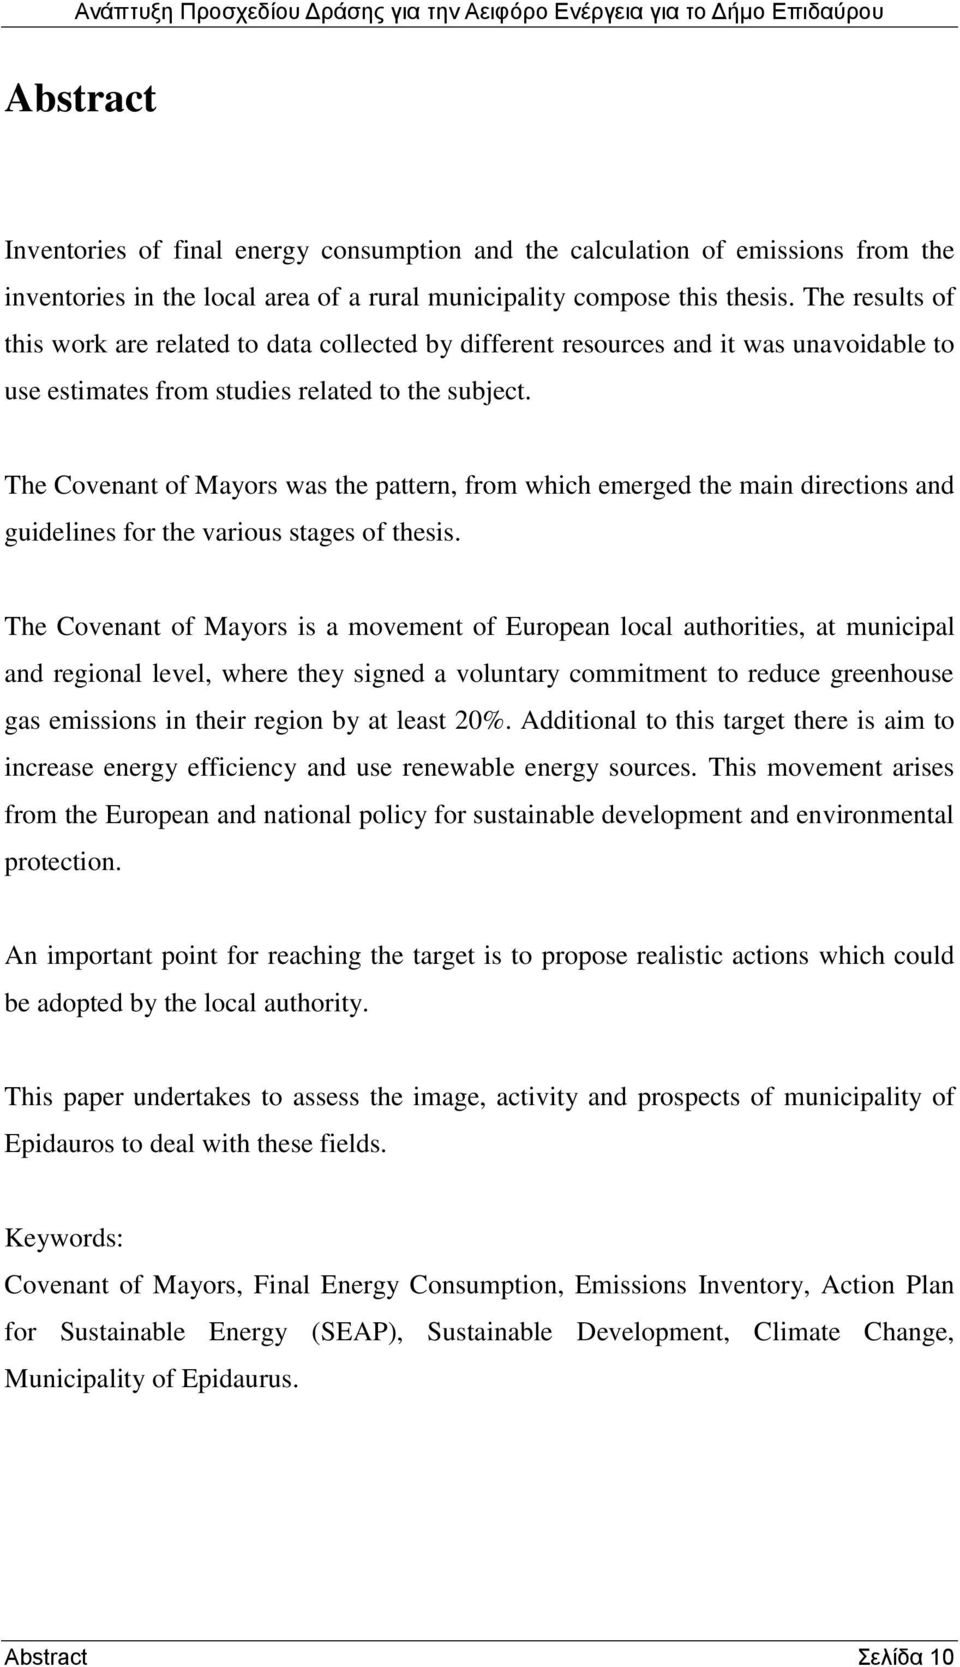 The Covenant of Mayors was the pattern, from which emerged the main directions and guidelines for the various stages of thesis.